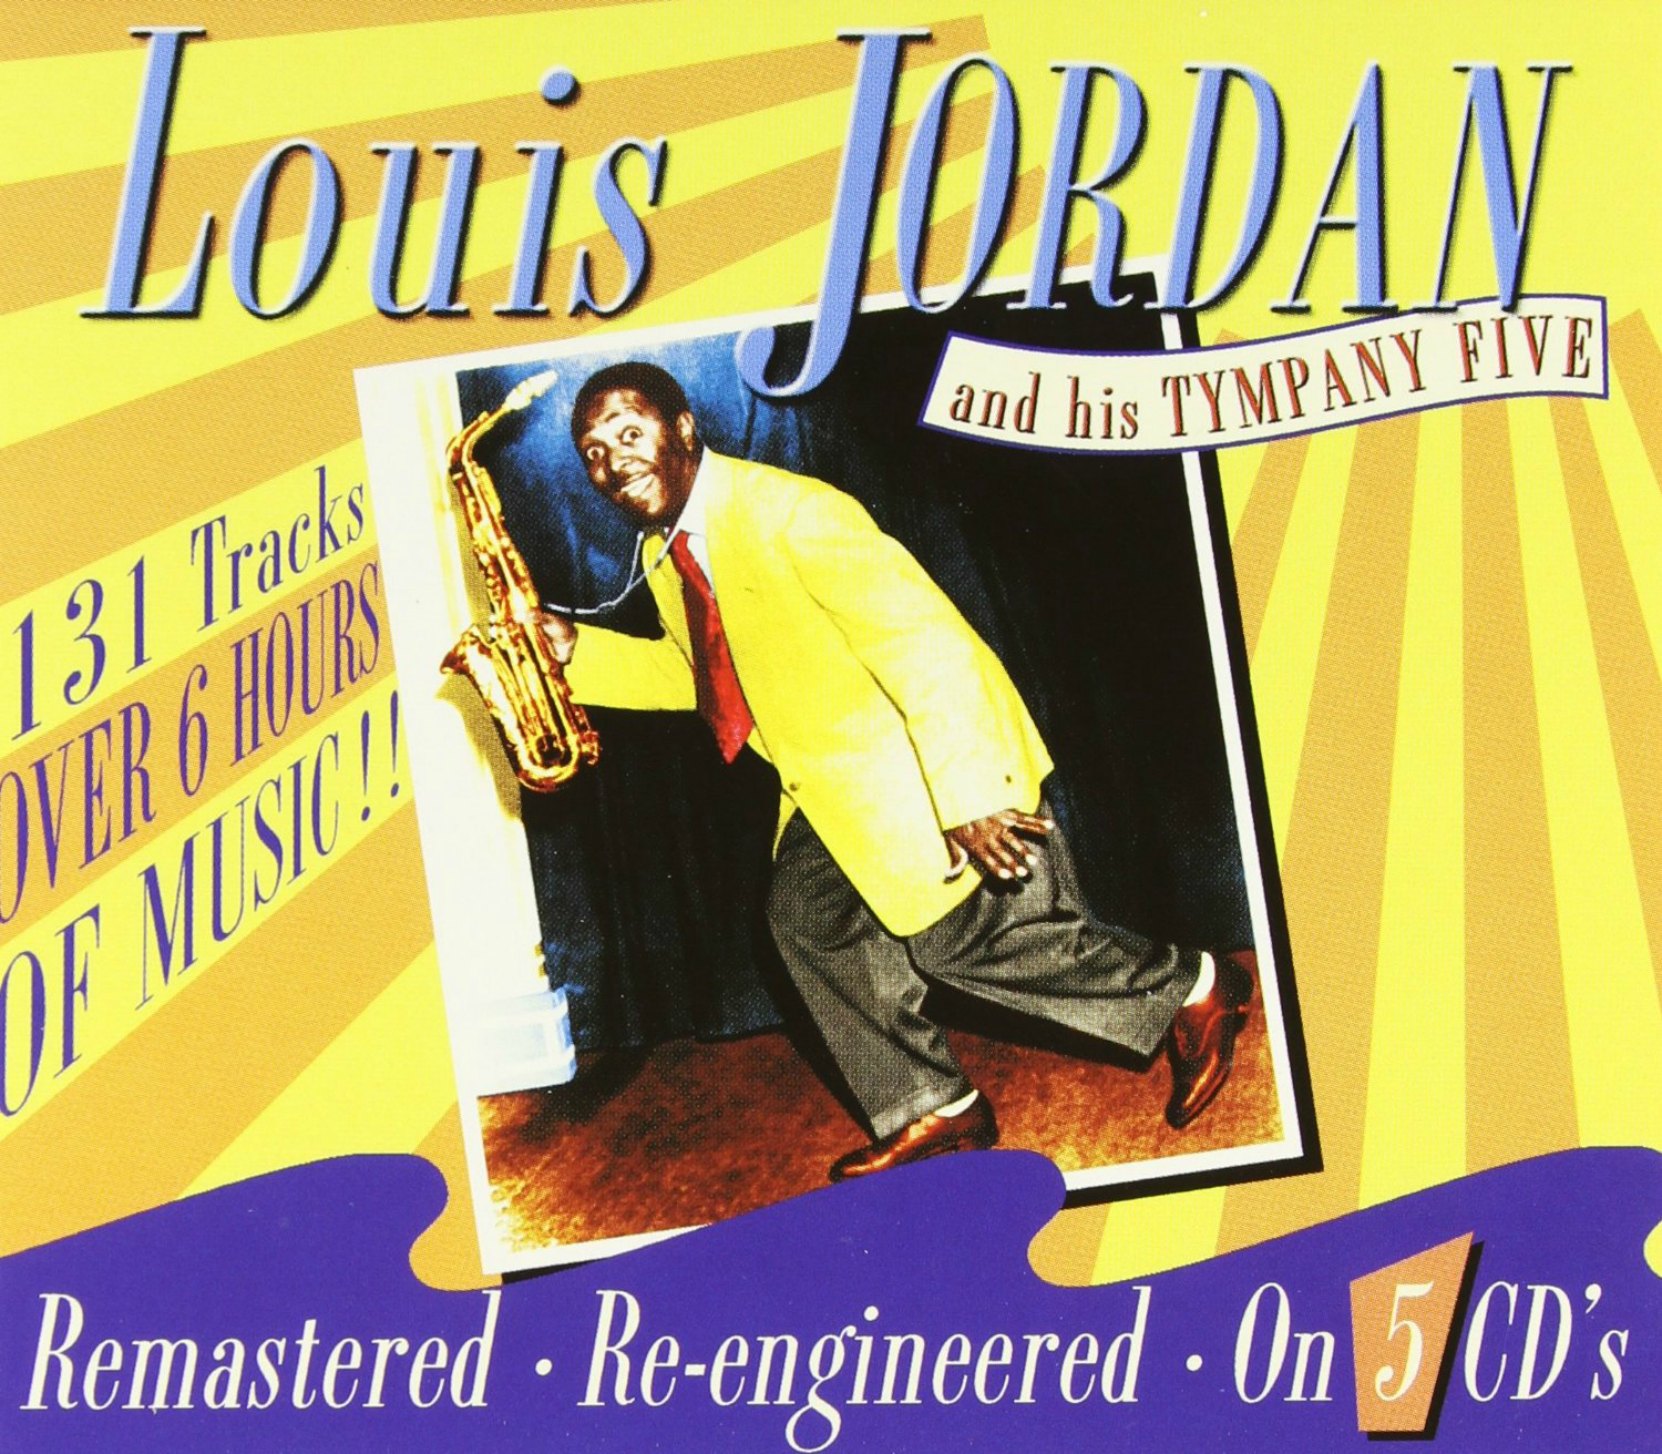 CD cover, Louis Jordan and His Tympany Five, a 5 CD box set on JSP Records